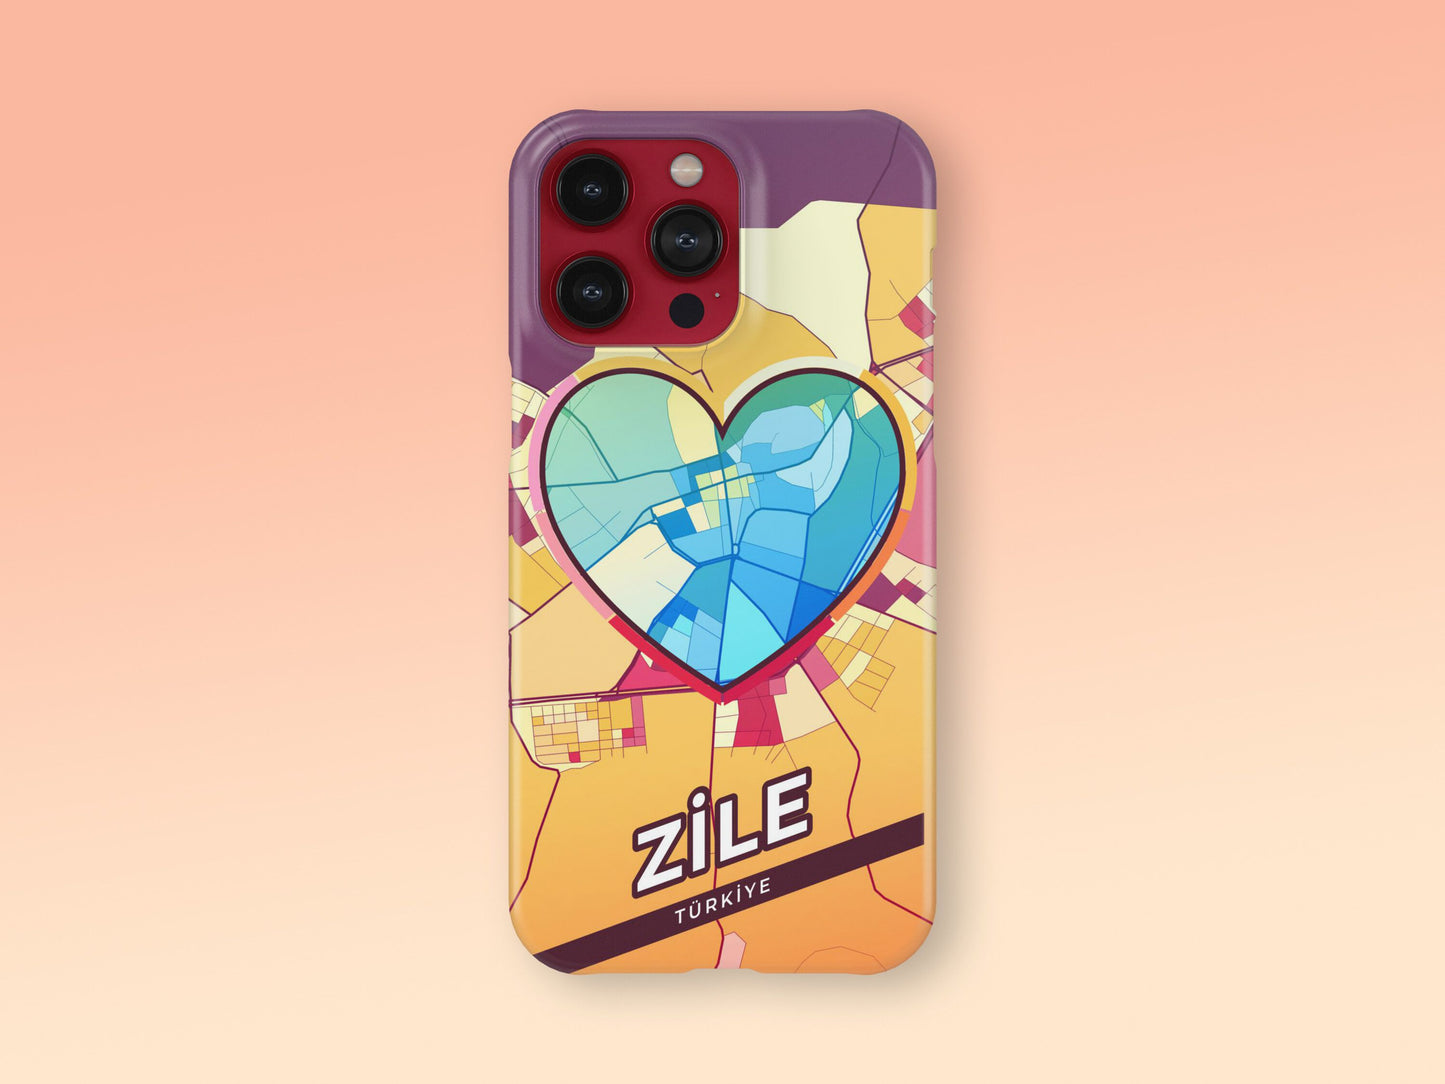 Zile Turkey slim phone case with colorful icon 2